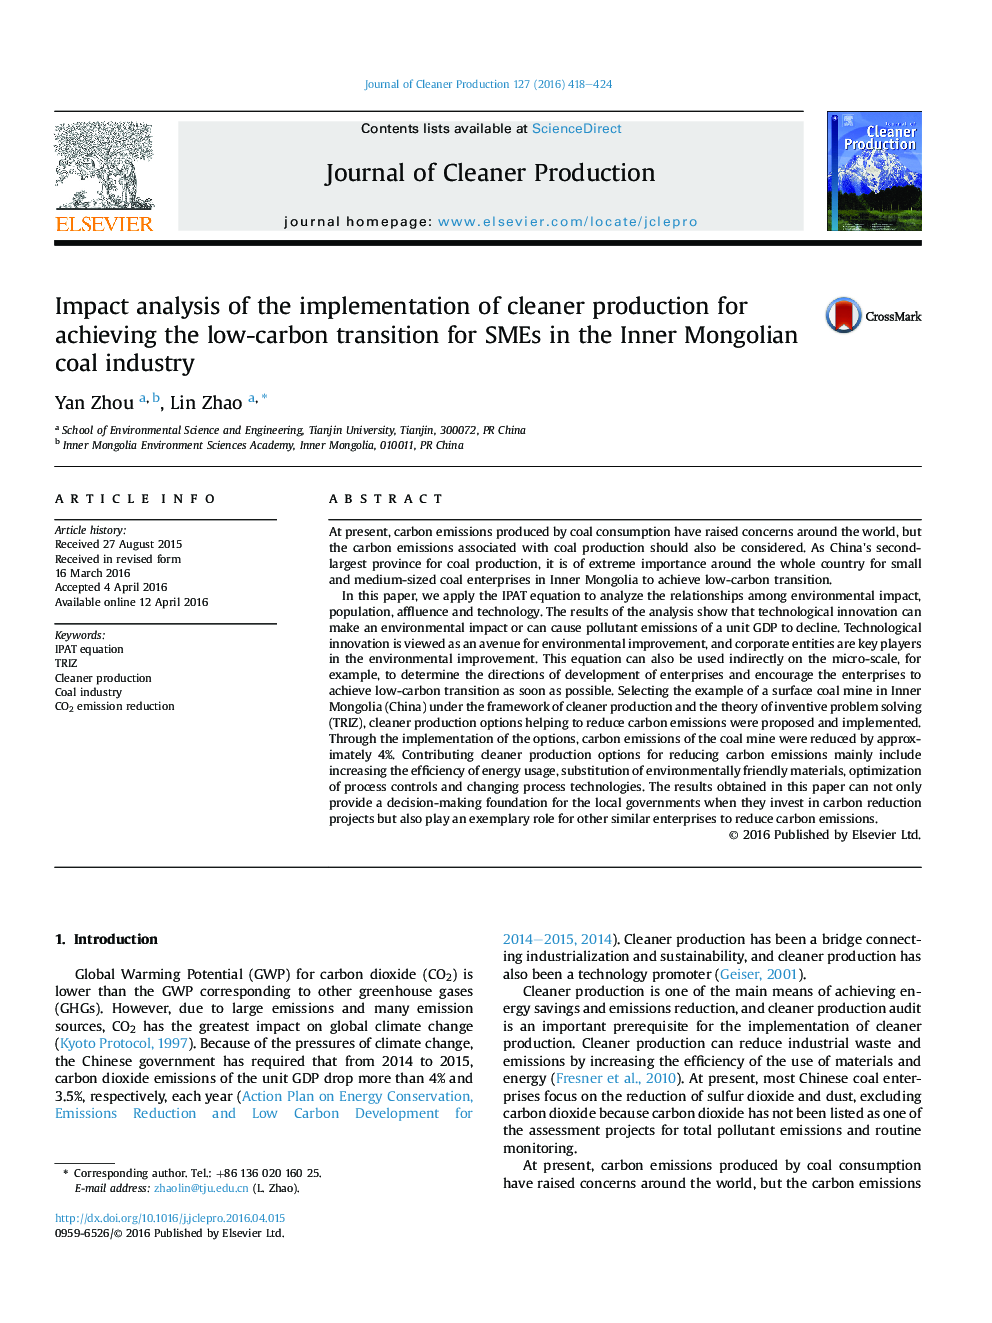 Impact analysis of the implementation of cleaner production for achieving the low-carbon transition for SMEs in the Inner Mongolian coal industry